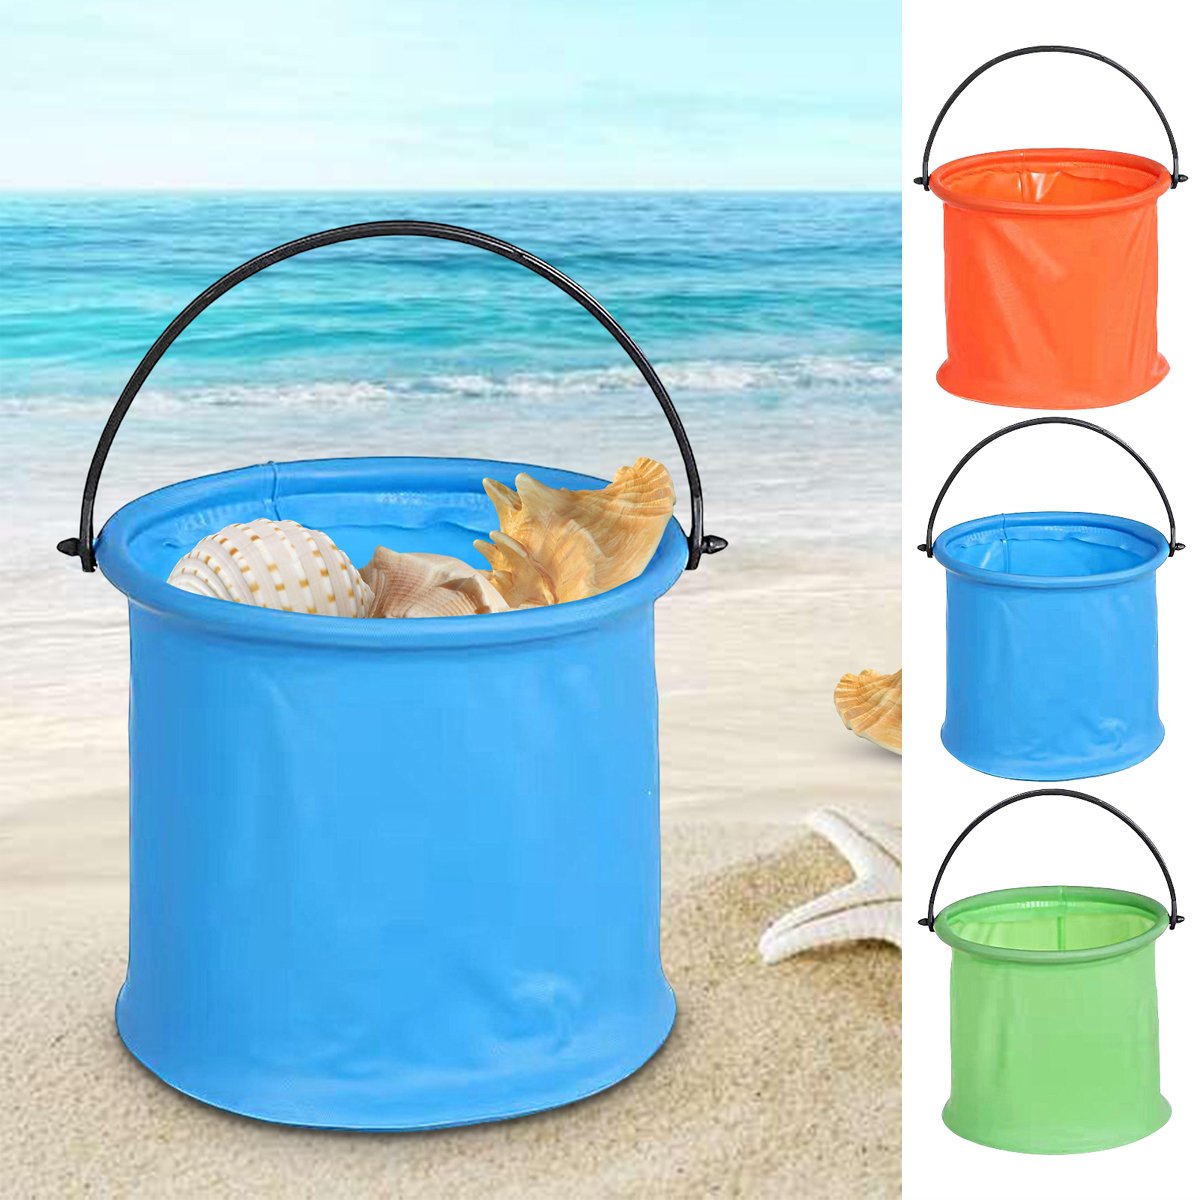 Travelwant Foldable Pail Bucket with Shovels Collapsible Buckets Multi Purpose for Beach, Camping Gear, Beach Party, Camping and Fishing, and Fun